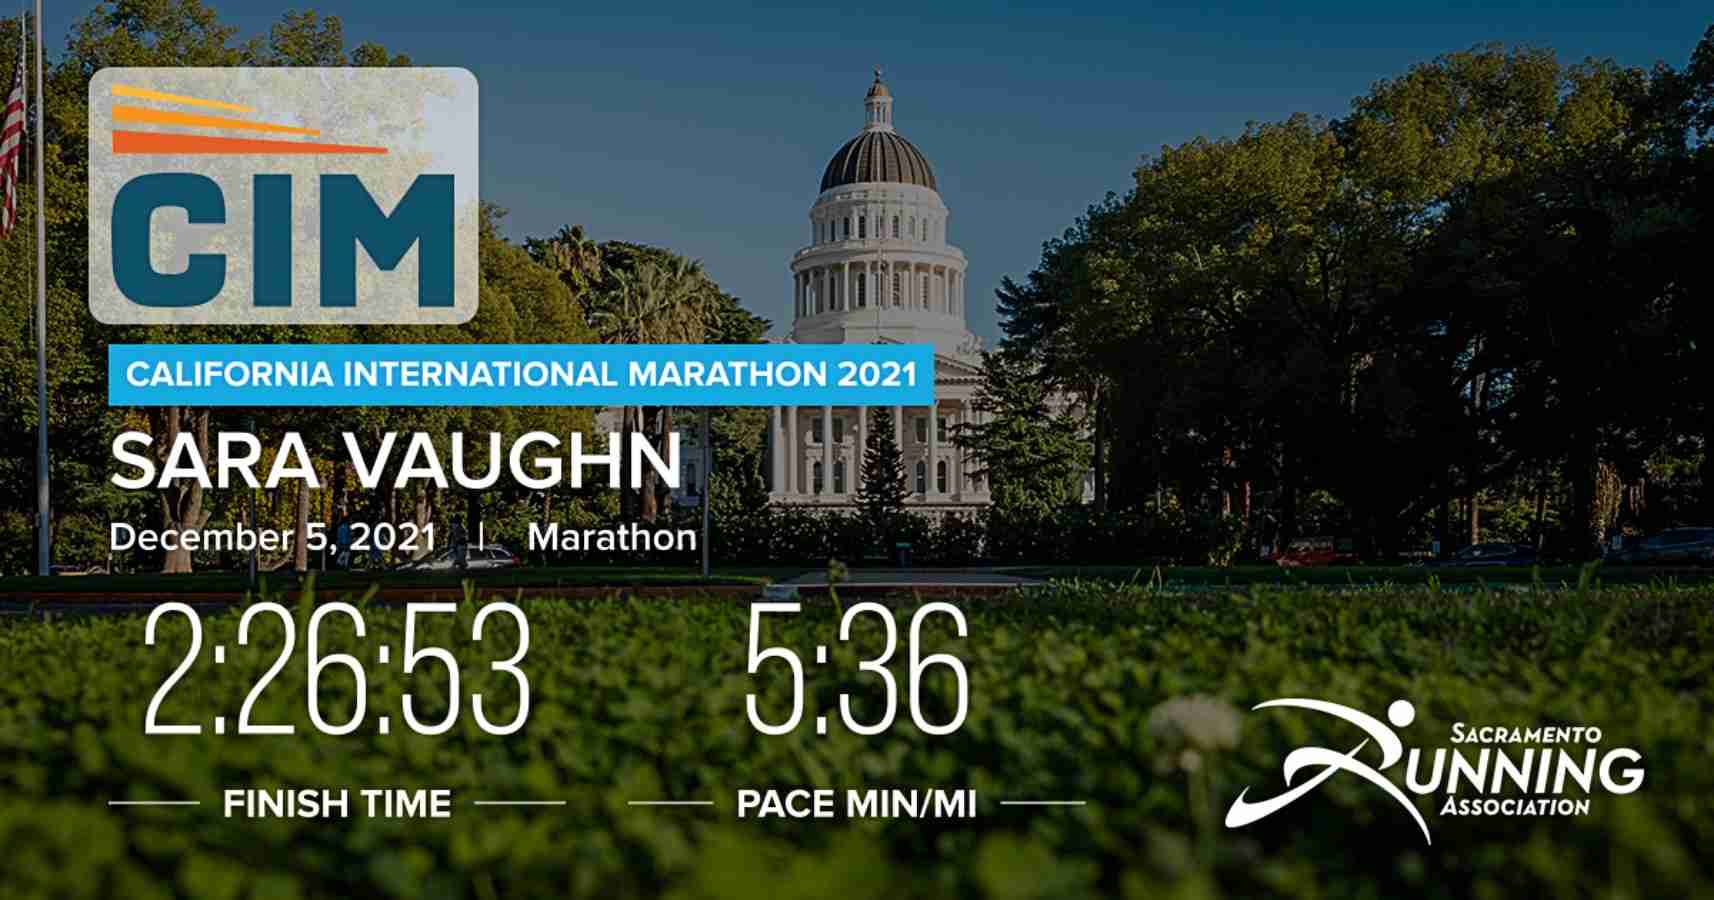 Top results from the 2021 California International Marathon; Gregg and Vaughn win titles